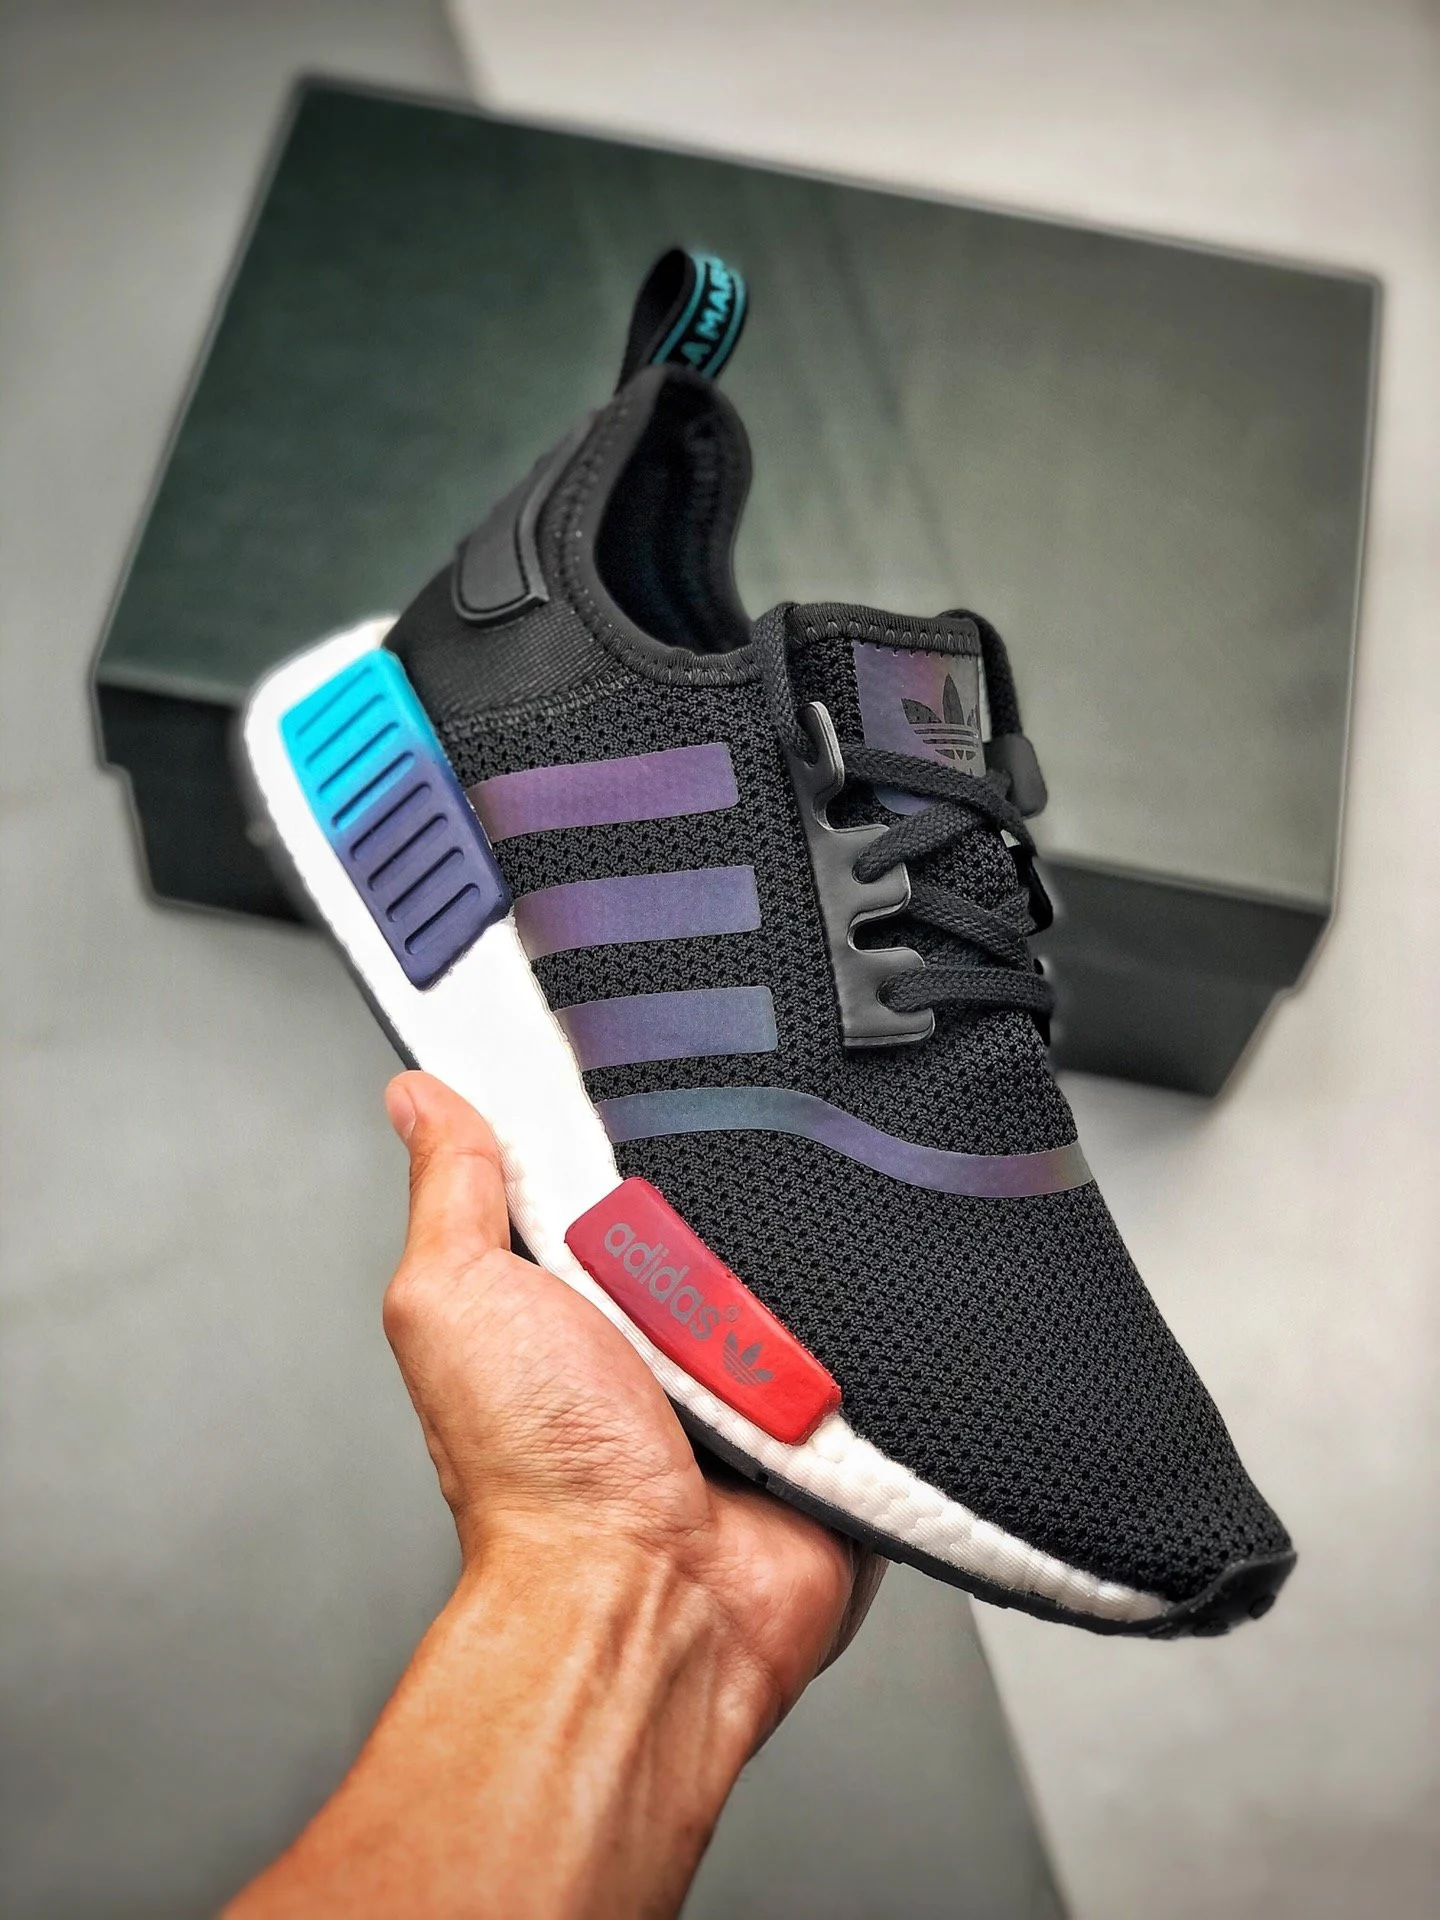 Adidas NMD R1 Core Black Boost Black FW4365 For Sale